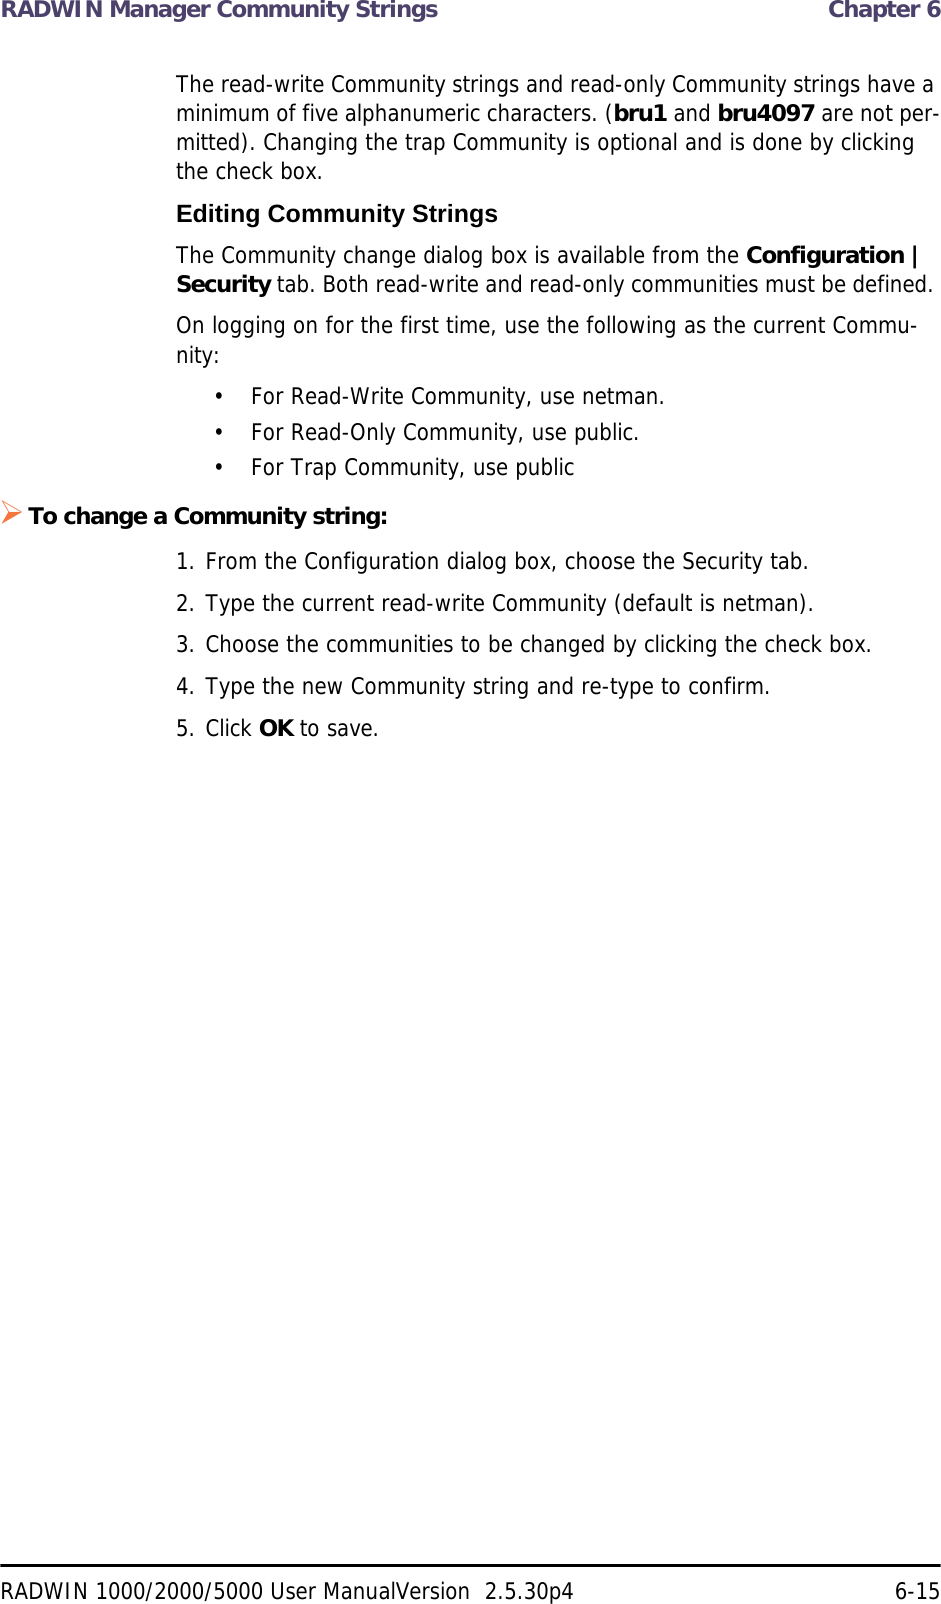 RADWIN Manager Community Strings  Chapter 6RADWIN 1000/2000/5000 User ManualVersion  2.5.30p4 6-15The read-write Community strings and read-only Community strings have a minimum of five alphanumeric characters. (bru1 and bru4097 are not per-mitted). Changing the trap Community is optional and is done by clicking the check box.Editing Community StringsThe Community change dialog box is available from the Configuration | Security tab. Both read-write and read-only communities must be defined. On logging on for the first time, use the following as the current Commu-nity:• For Read-Write Community, use netman. • For Read-Only Community, use public.• For Trap Community, use publicTo change a Community string:1. From the Configuration dialog box, choose the Security tab.2. Type the current read-write Community (default is netman).3. Choose the communities to be changed by clicking the check box.4. Type the new Community string and re-type to confirm.5. Click OK to save.